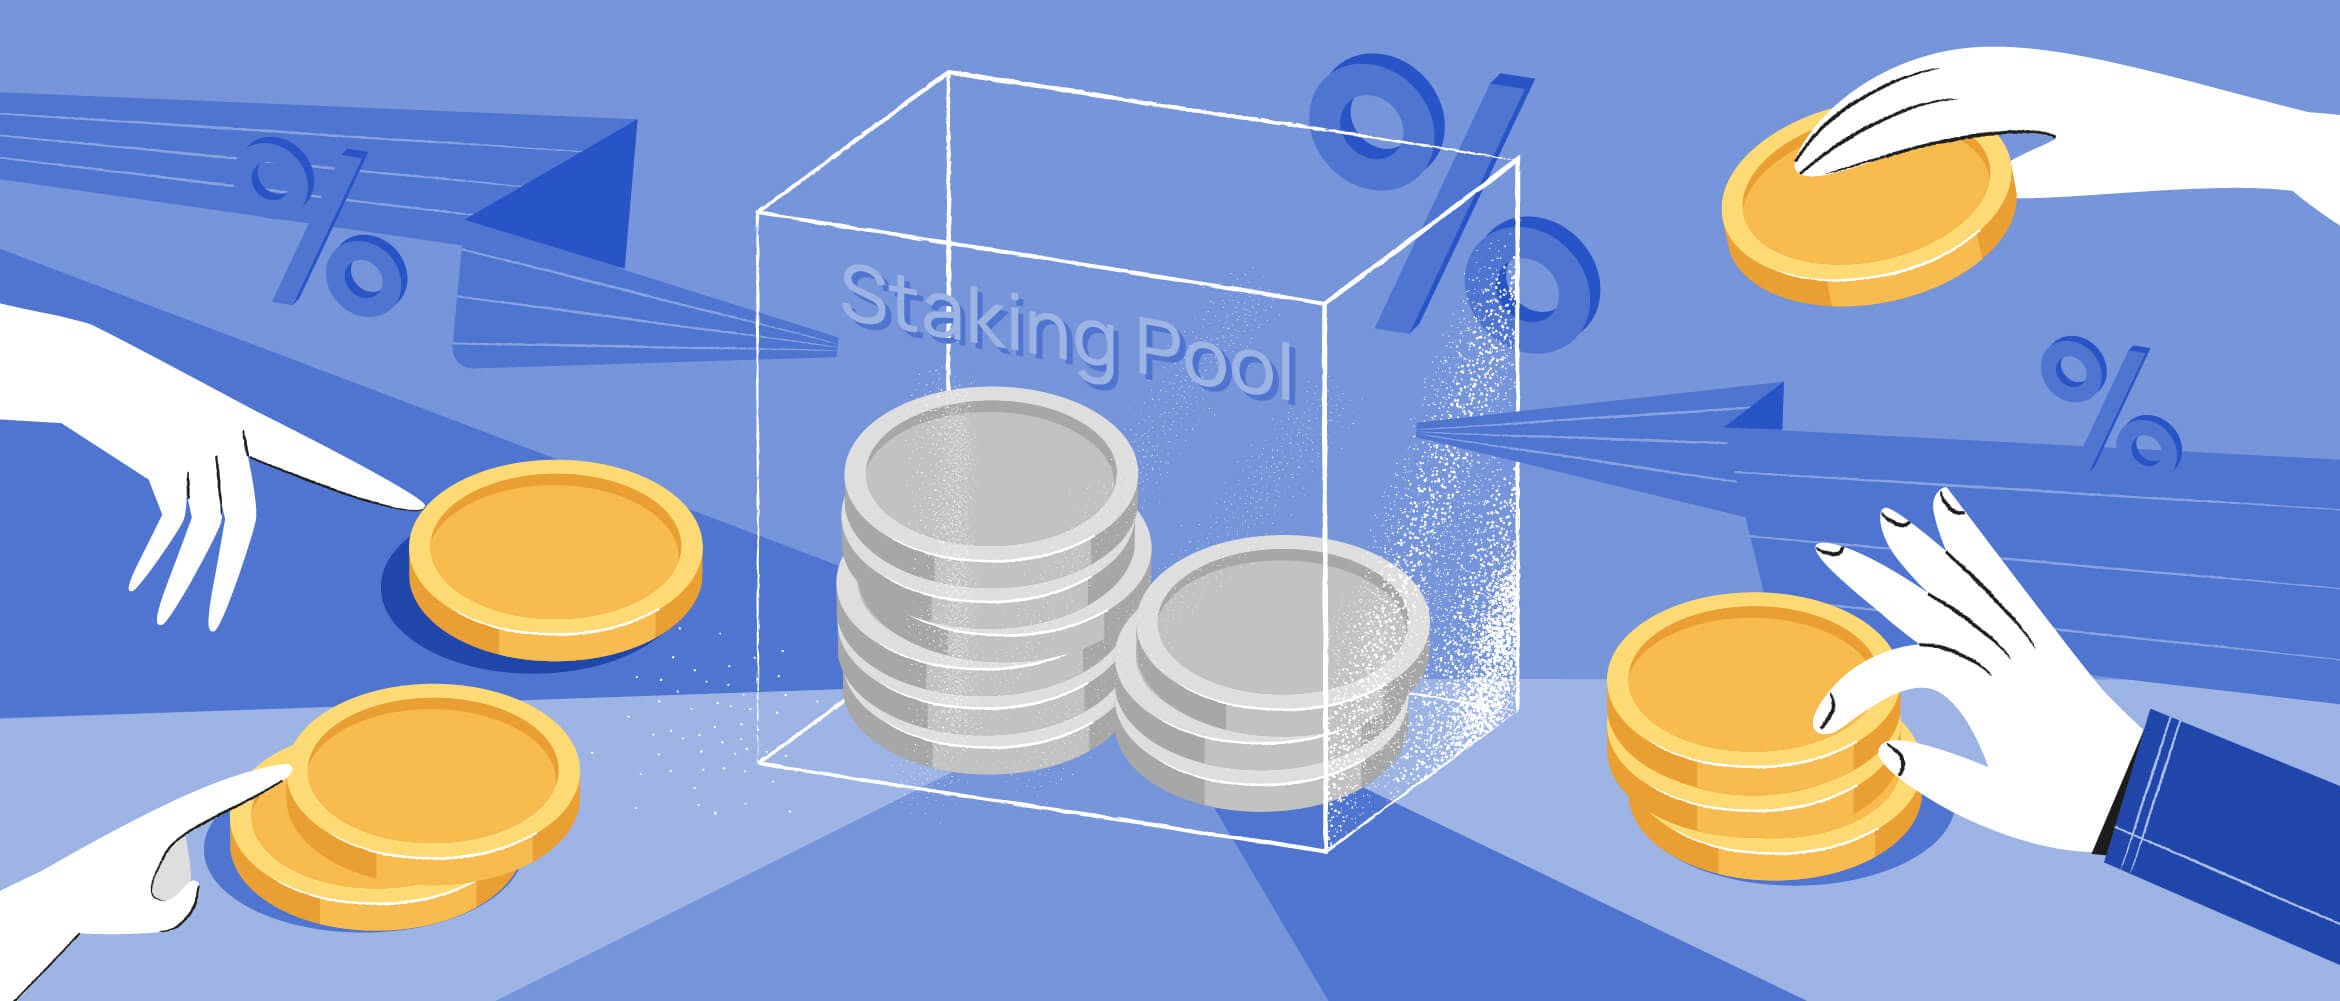 Staking Pools